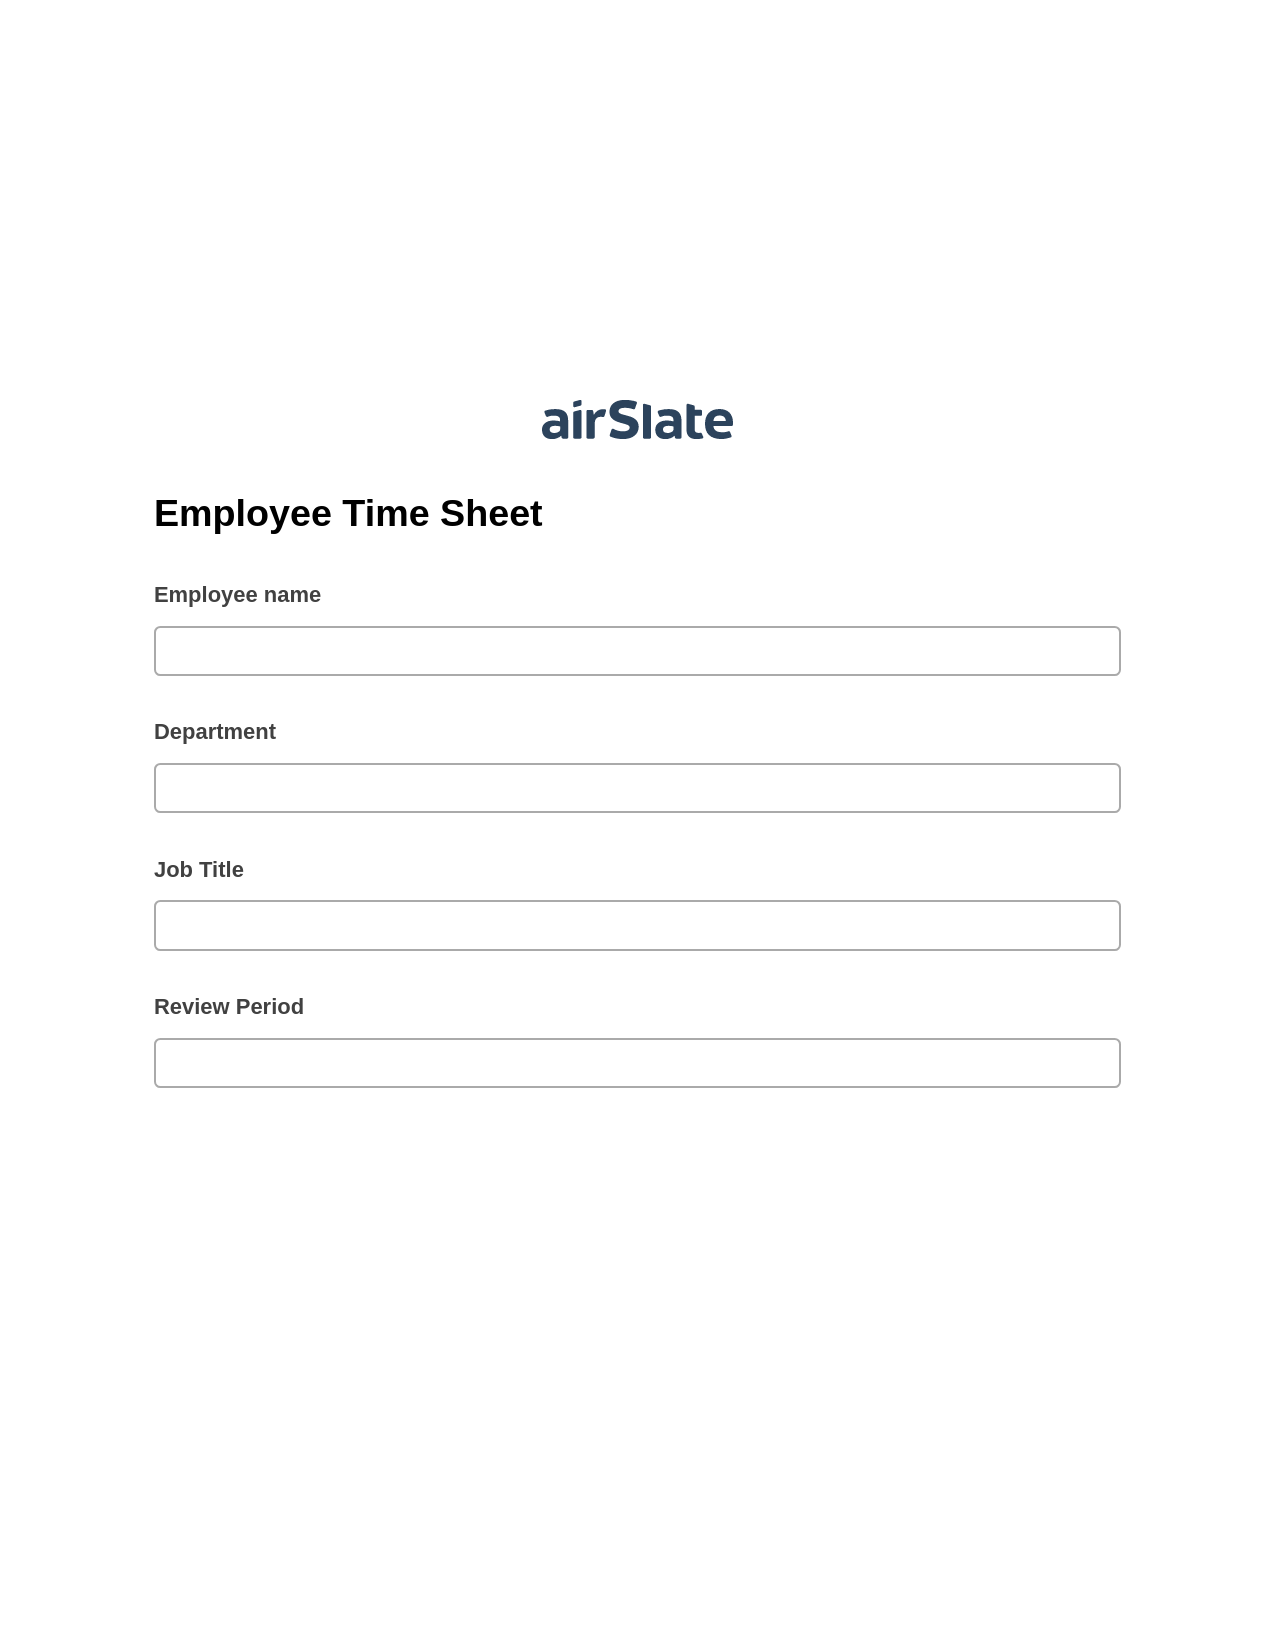 Multirole Employee Time Sheet Pre-fill from MS Dynamics 365 Records, Lock the Slate Bot, Export to Google Sheet Bot